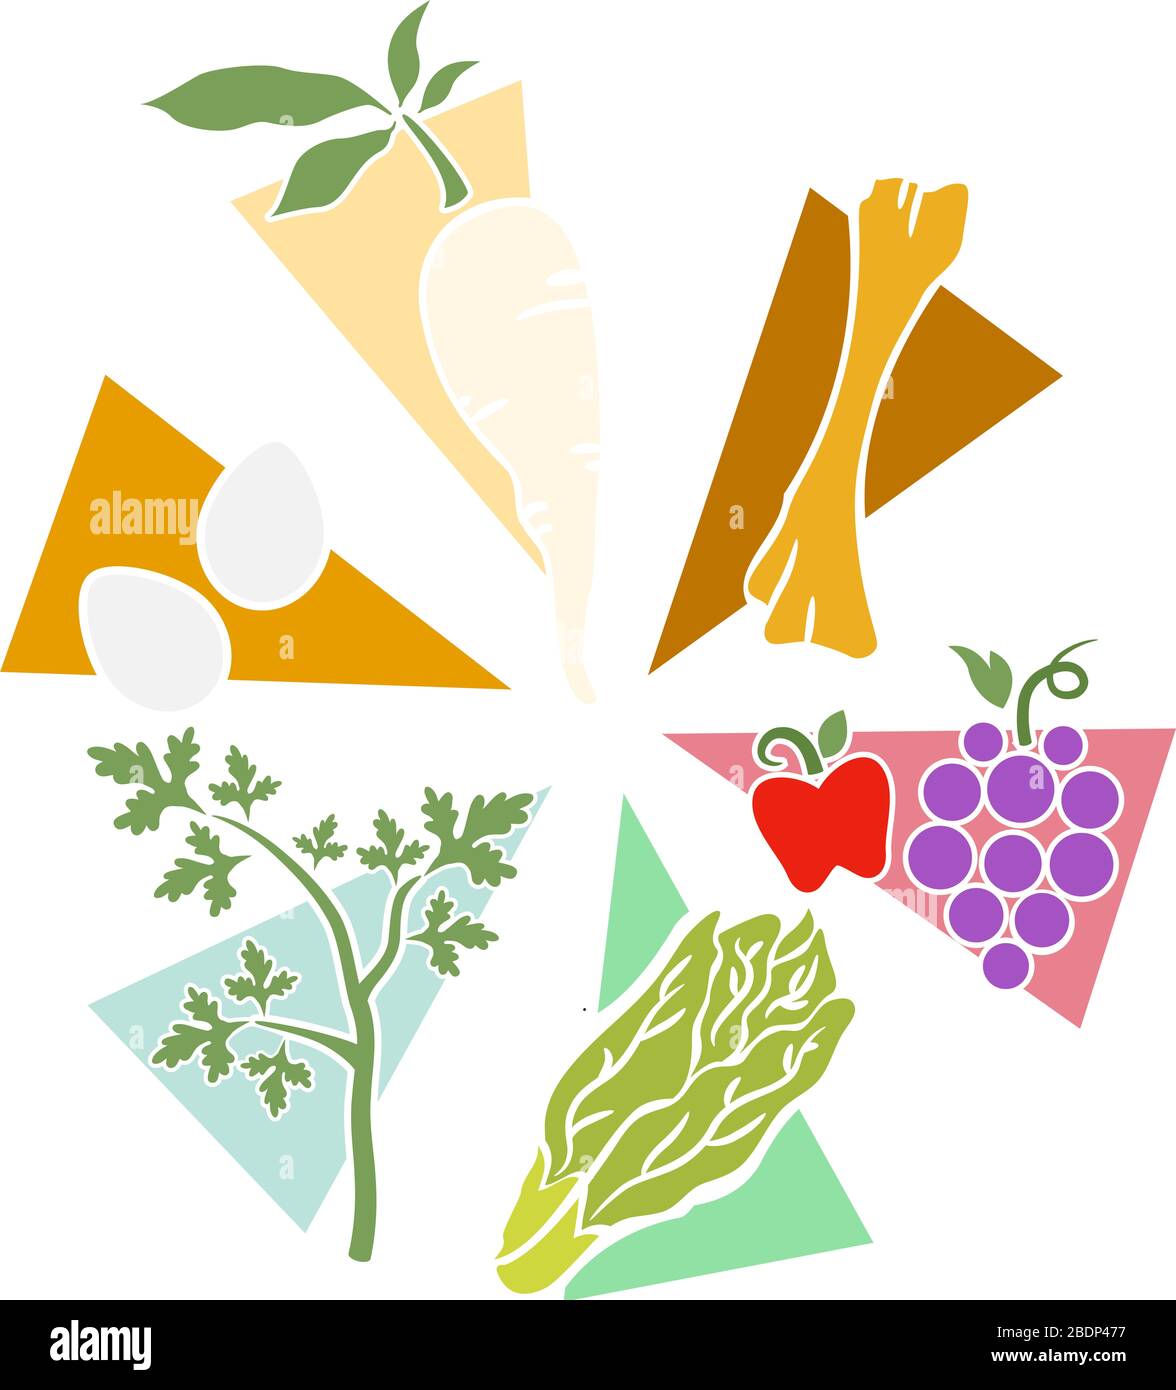 Illustration of Passover Food Design From Turnip, Parsley Leaf, Eggs, Grapes, Apple to Lettuce on Stencil Stock Photo